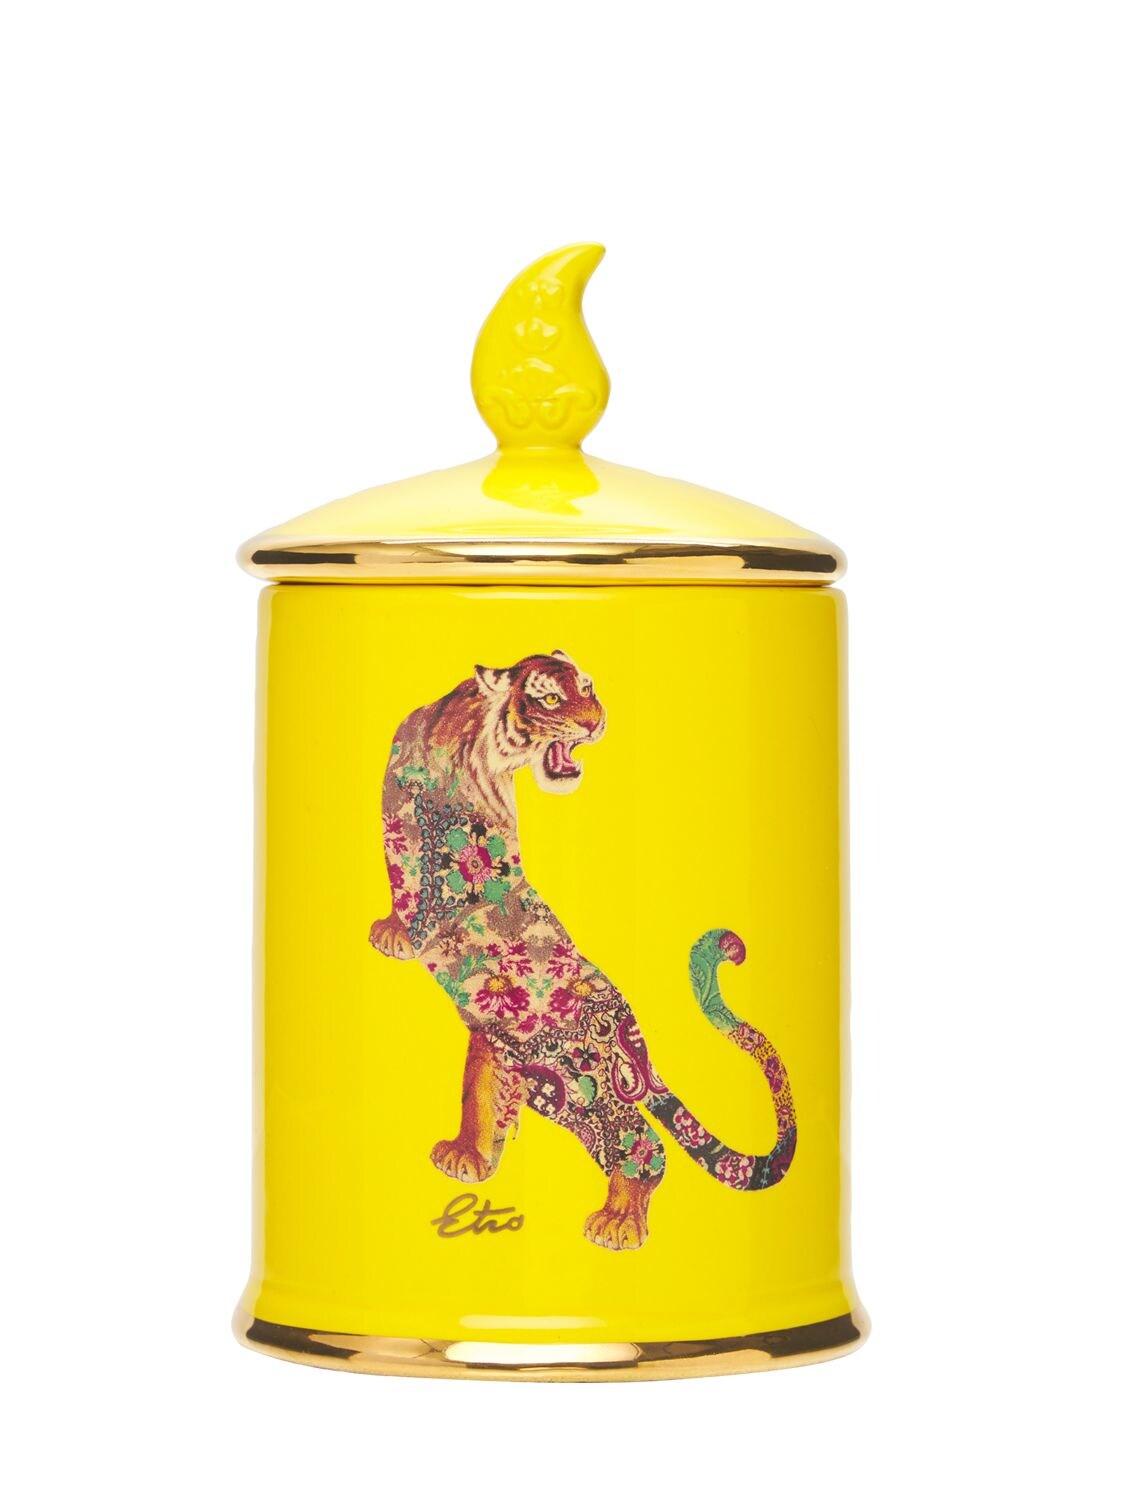 Etro Tiger Amber Ceramic Candle In Yellow